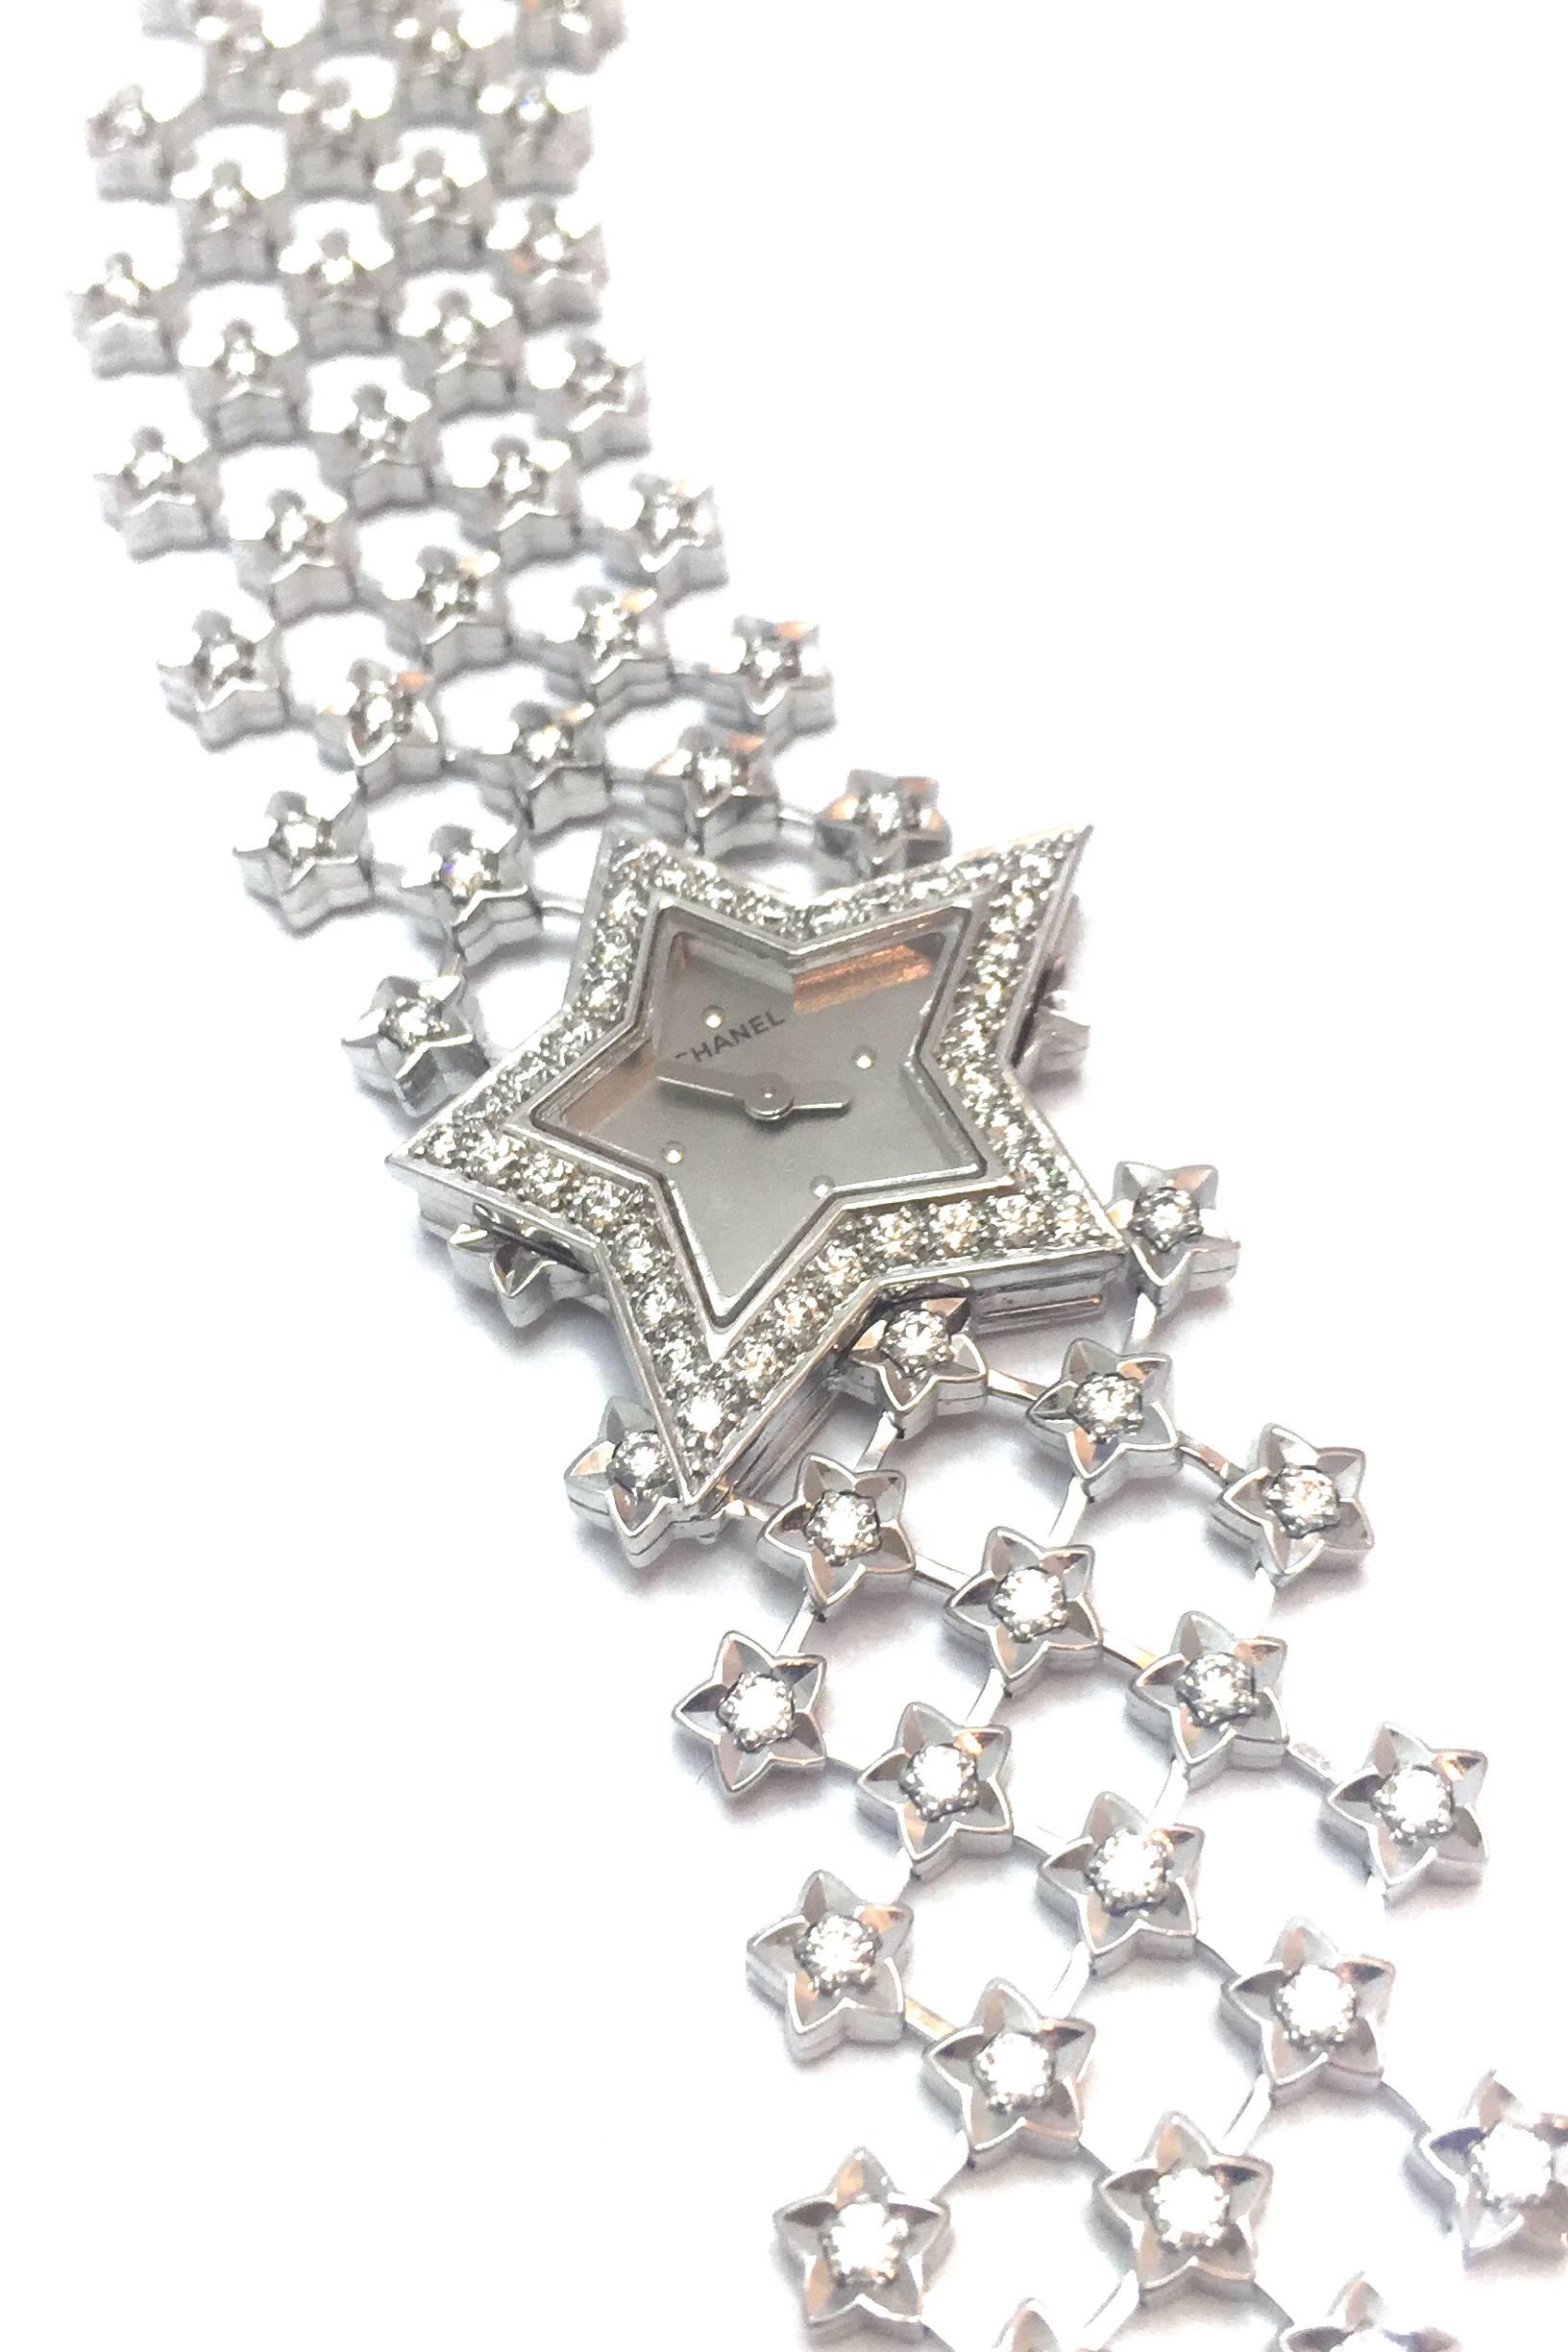 A 750/000 white gold jewelry Chanel watch, "Poussière d'étoile" collection. 
The bezel in shape of a star is set with diamonds, the large crossed motif bracelet is enhanced with falling stars, silvered dial. 
Circa 2000.
Quartz